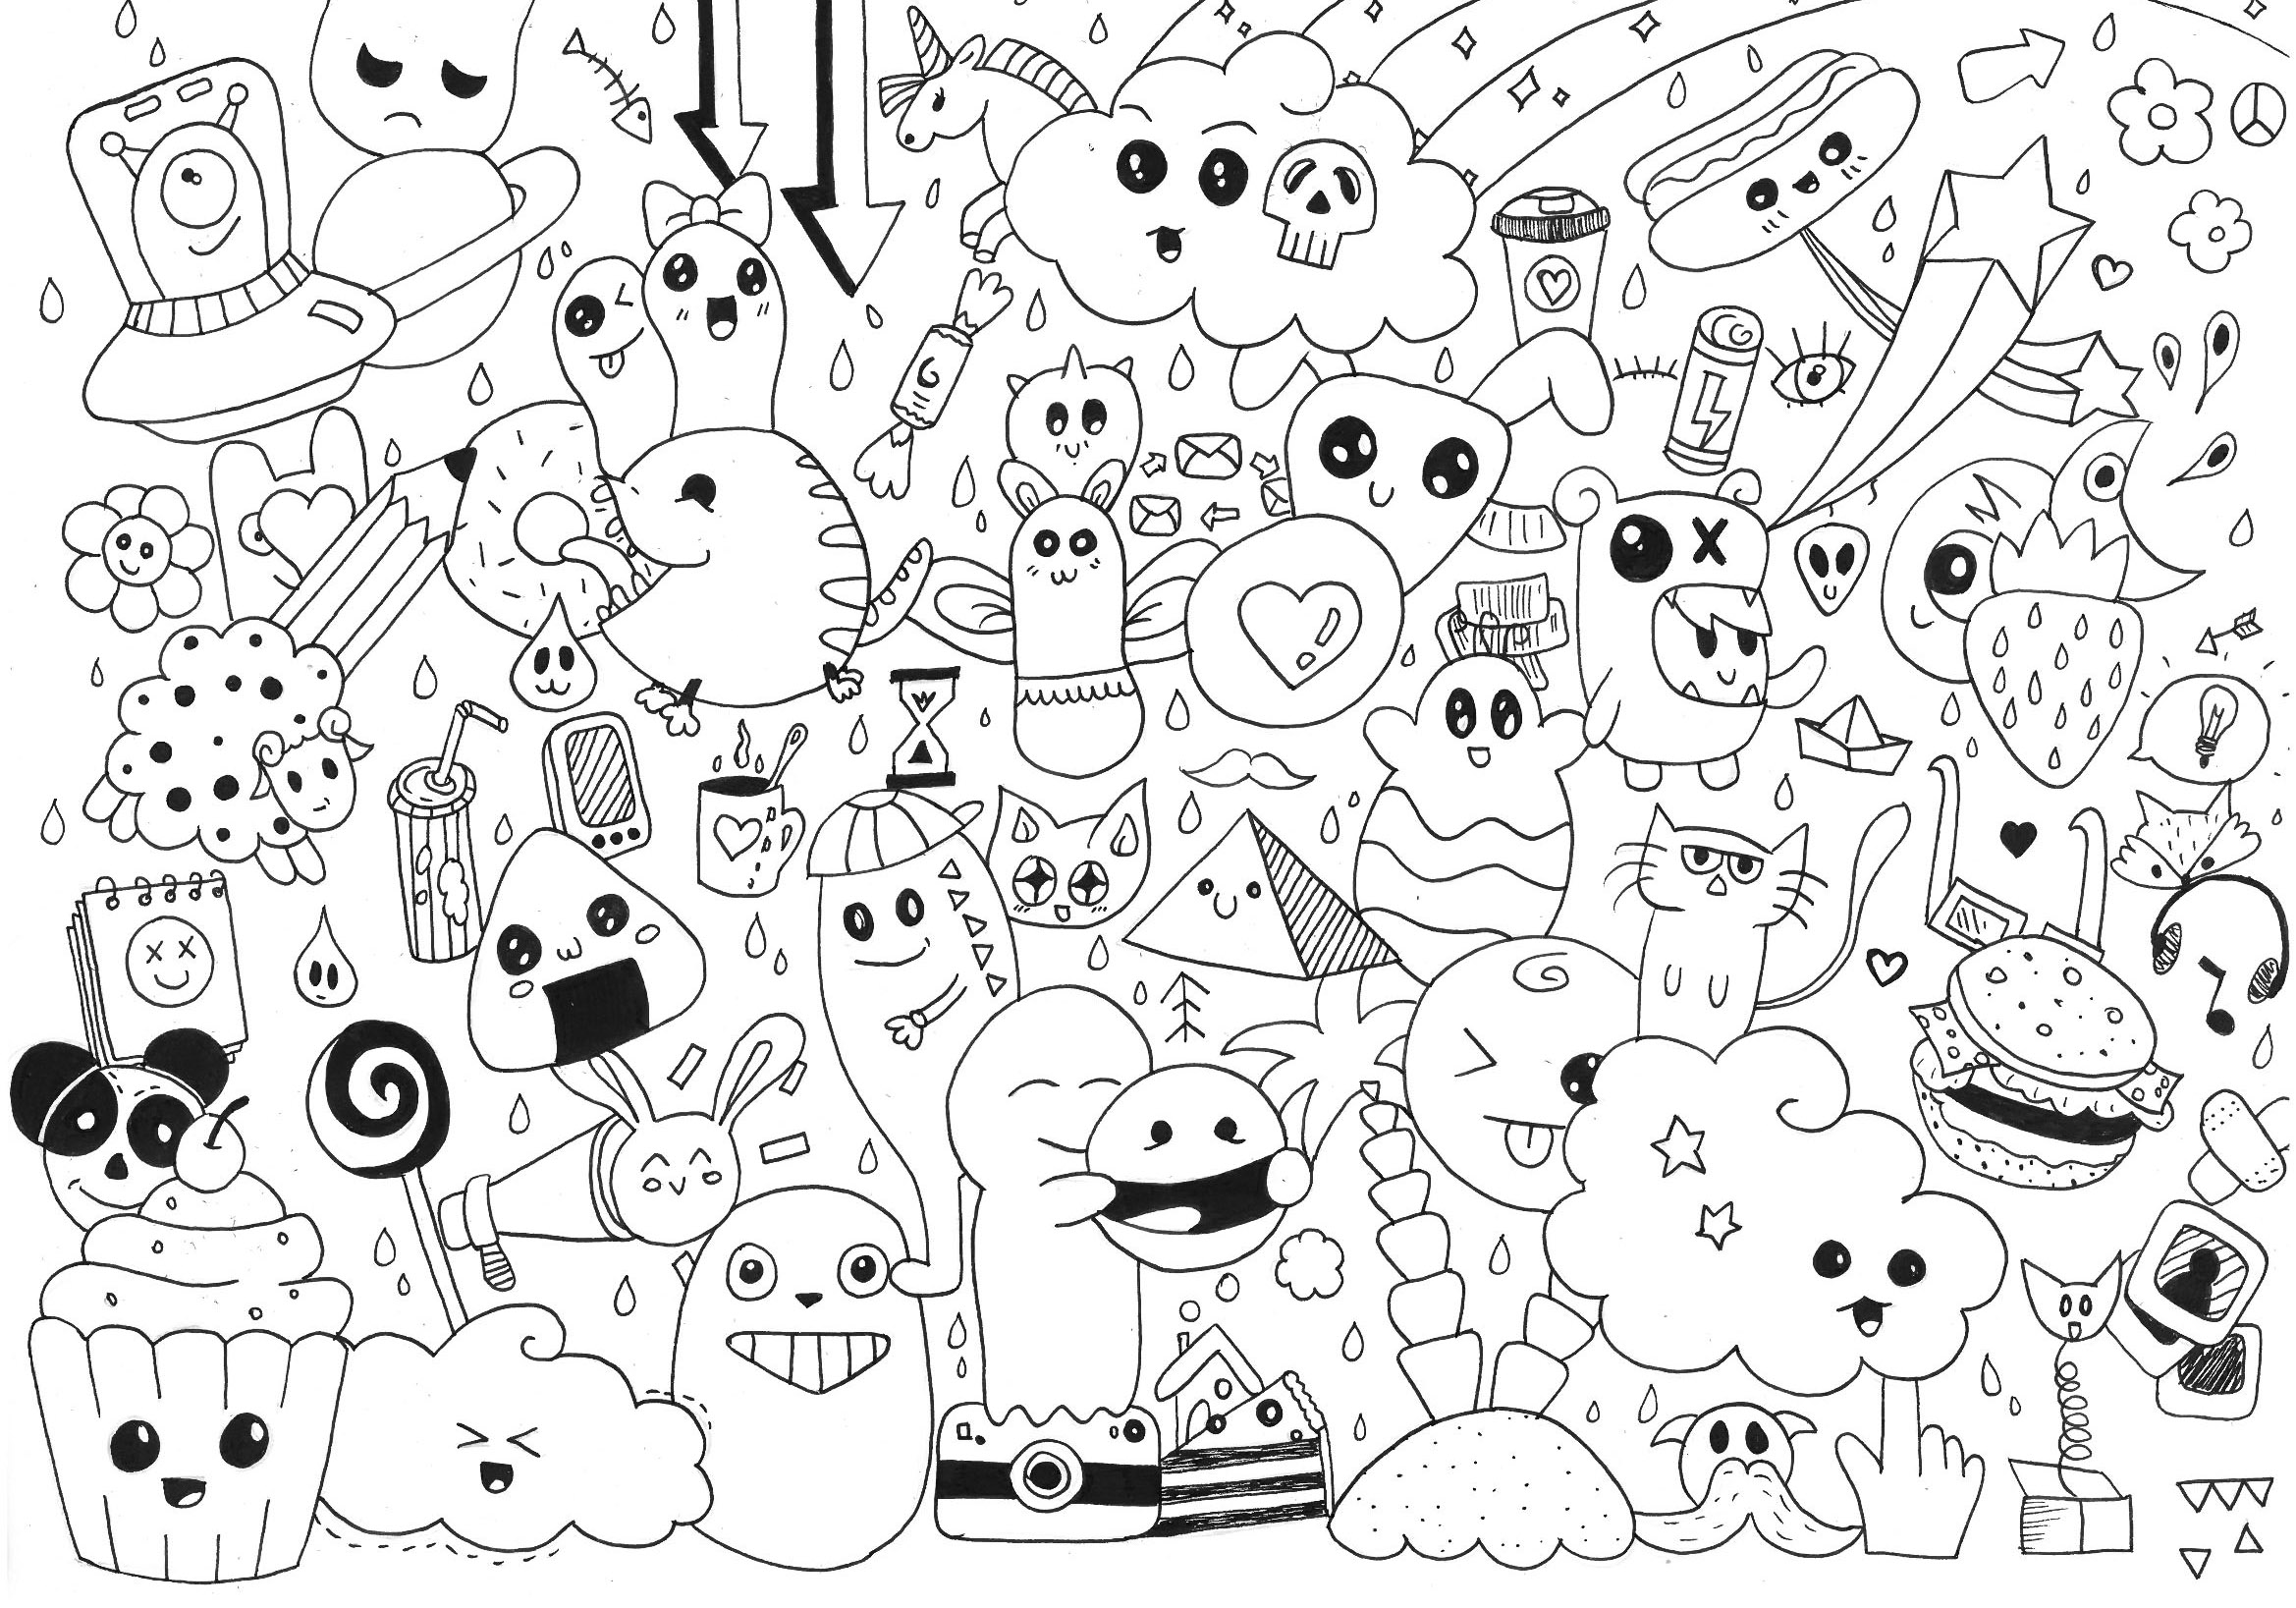 Many small Kawaii characters, very happy to be here together !, Artist : Rachel